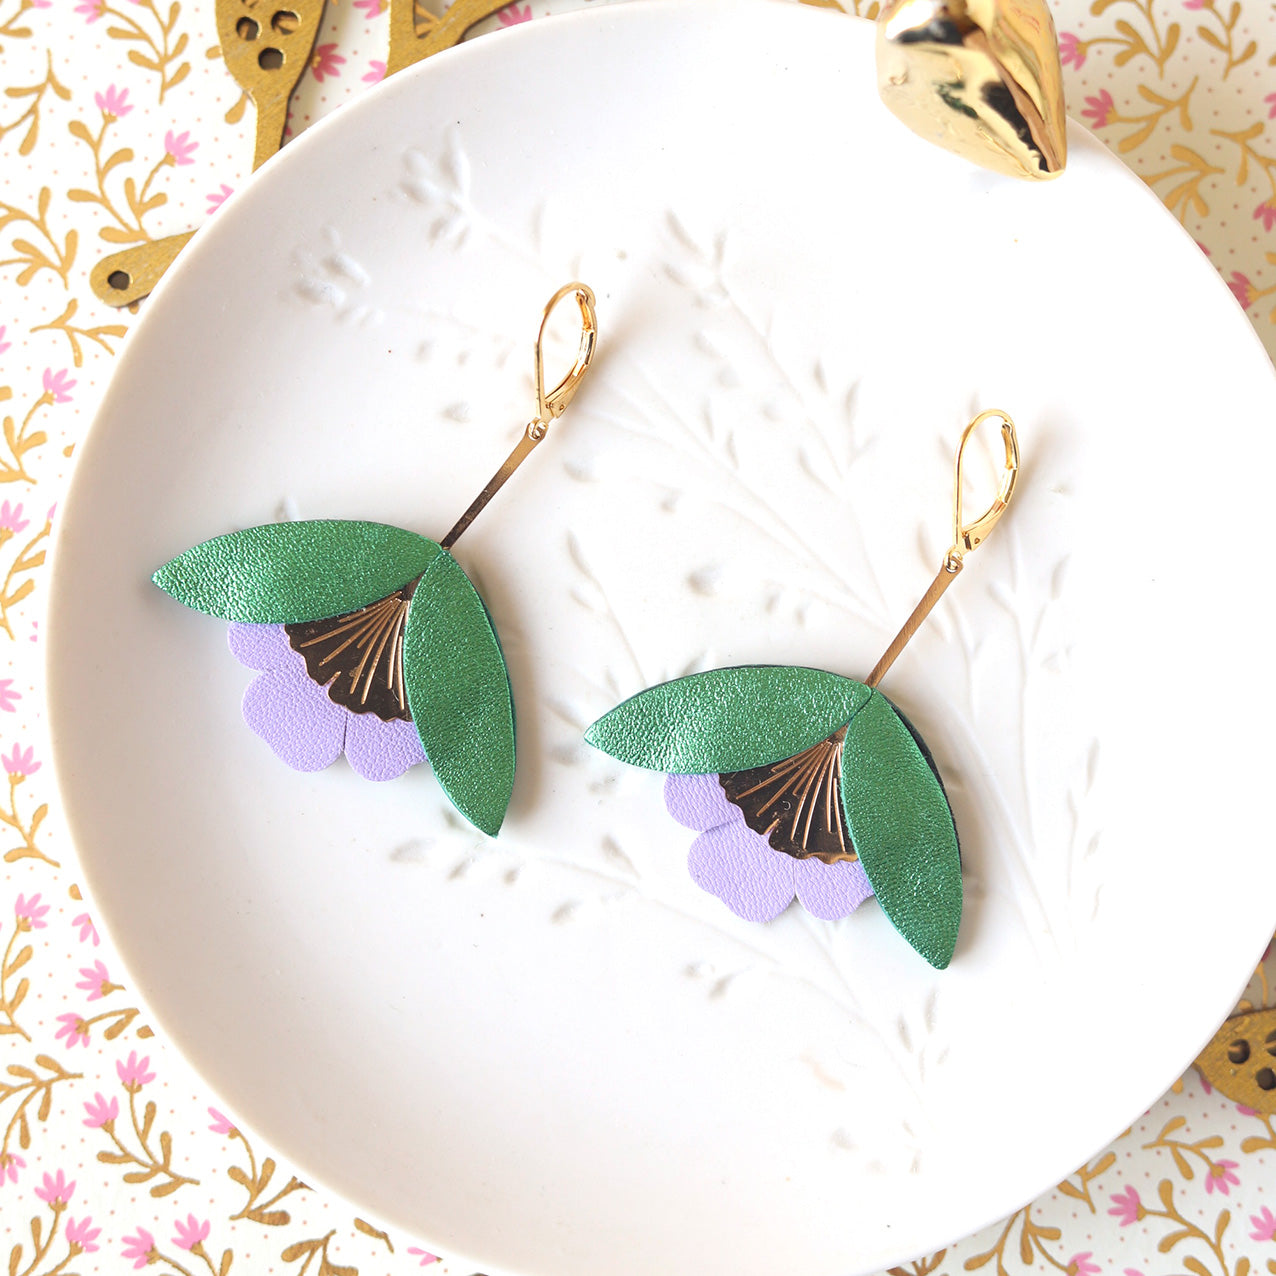 Ginkgo Flower earrings in metallic green and mauve leather